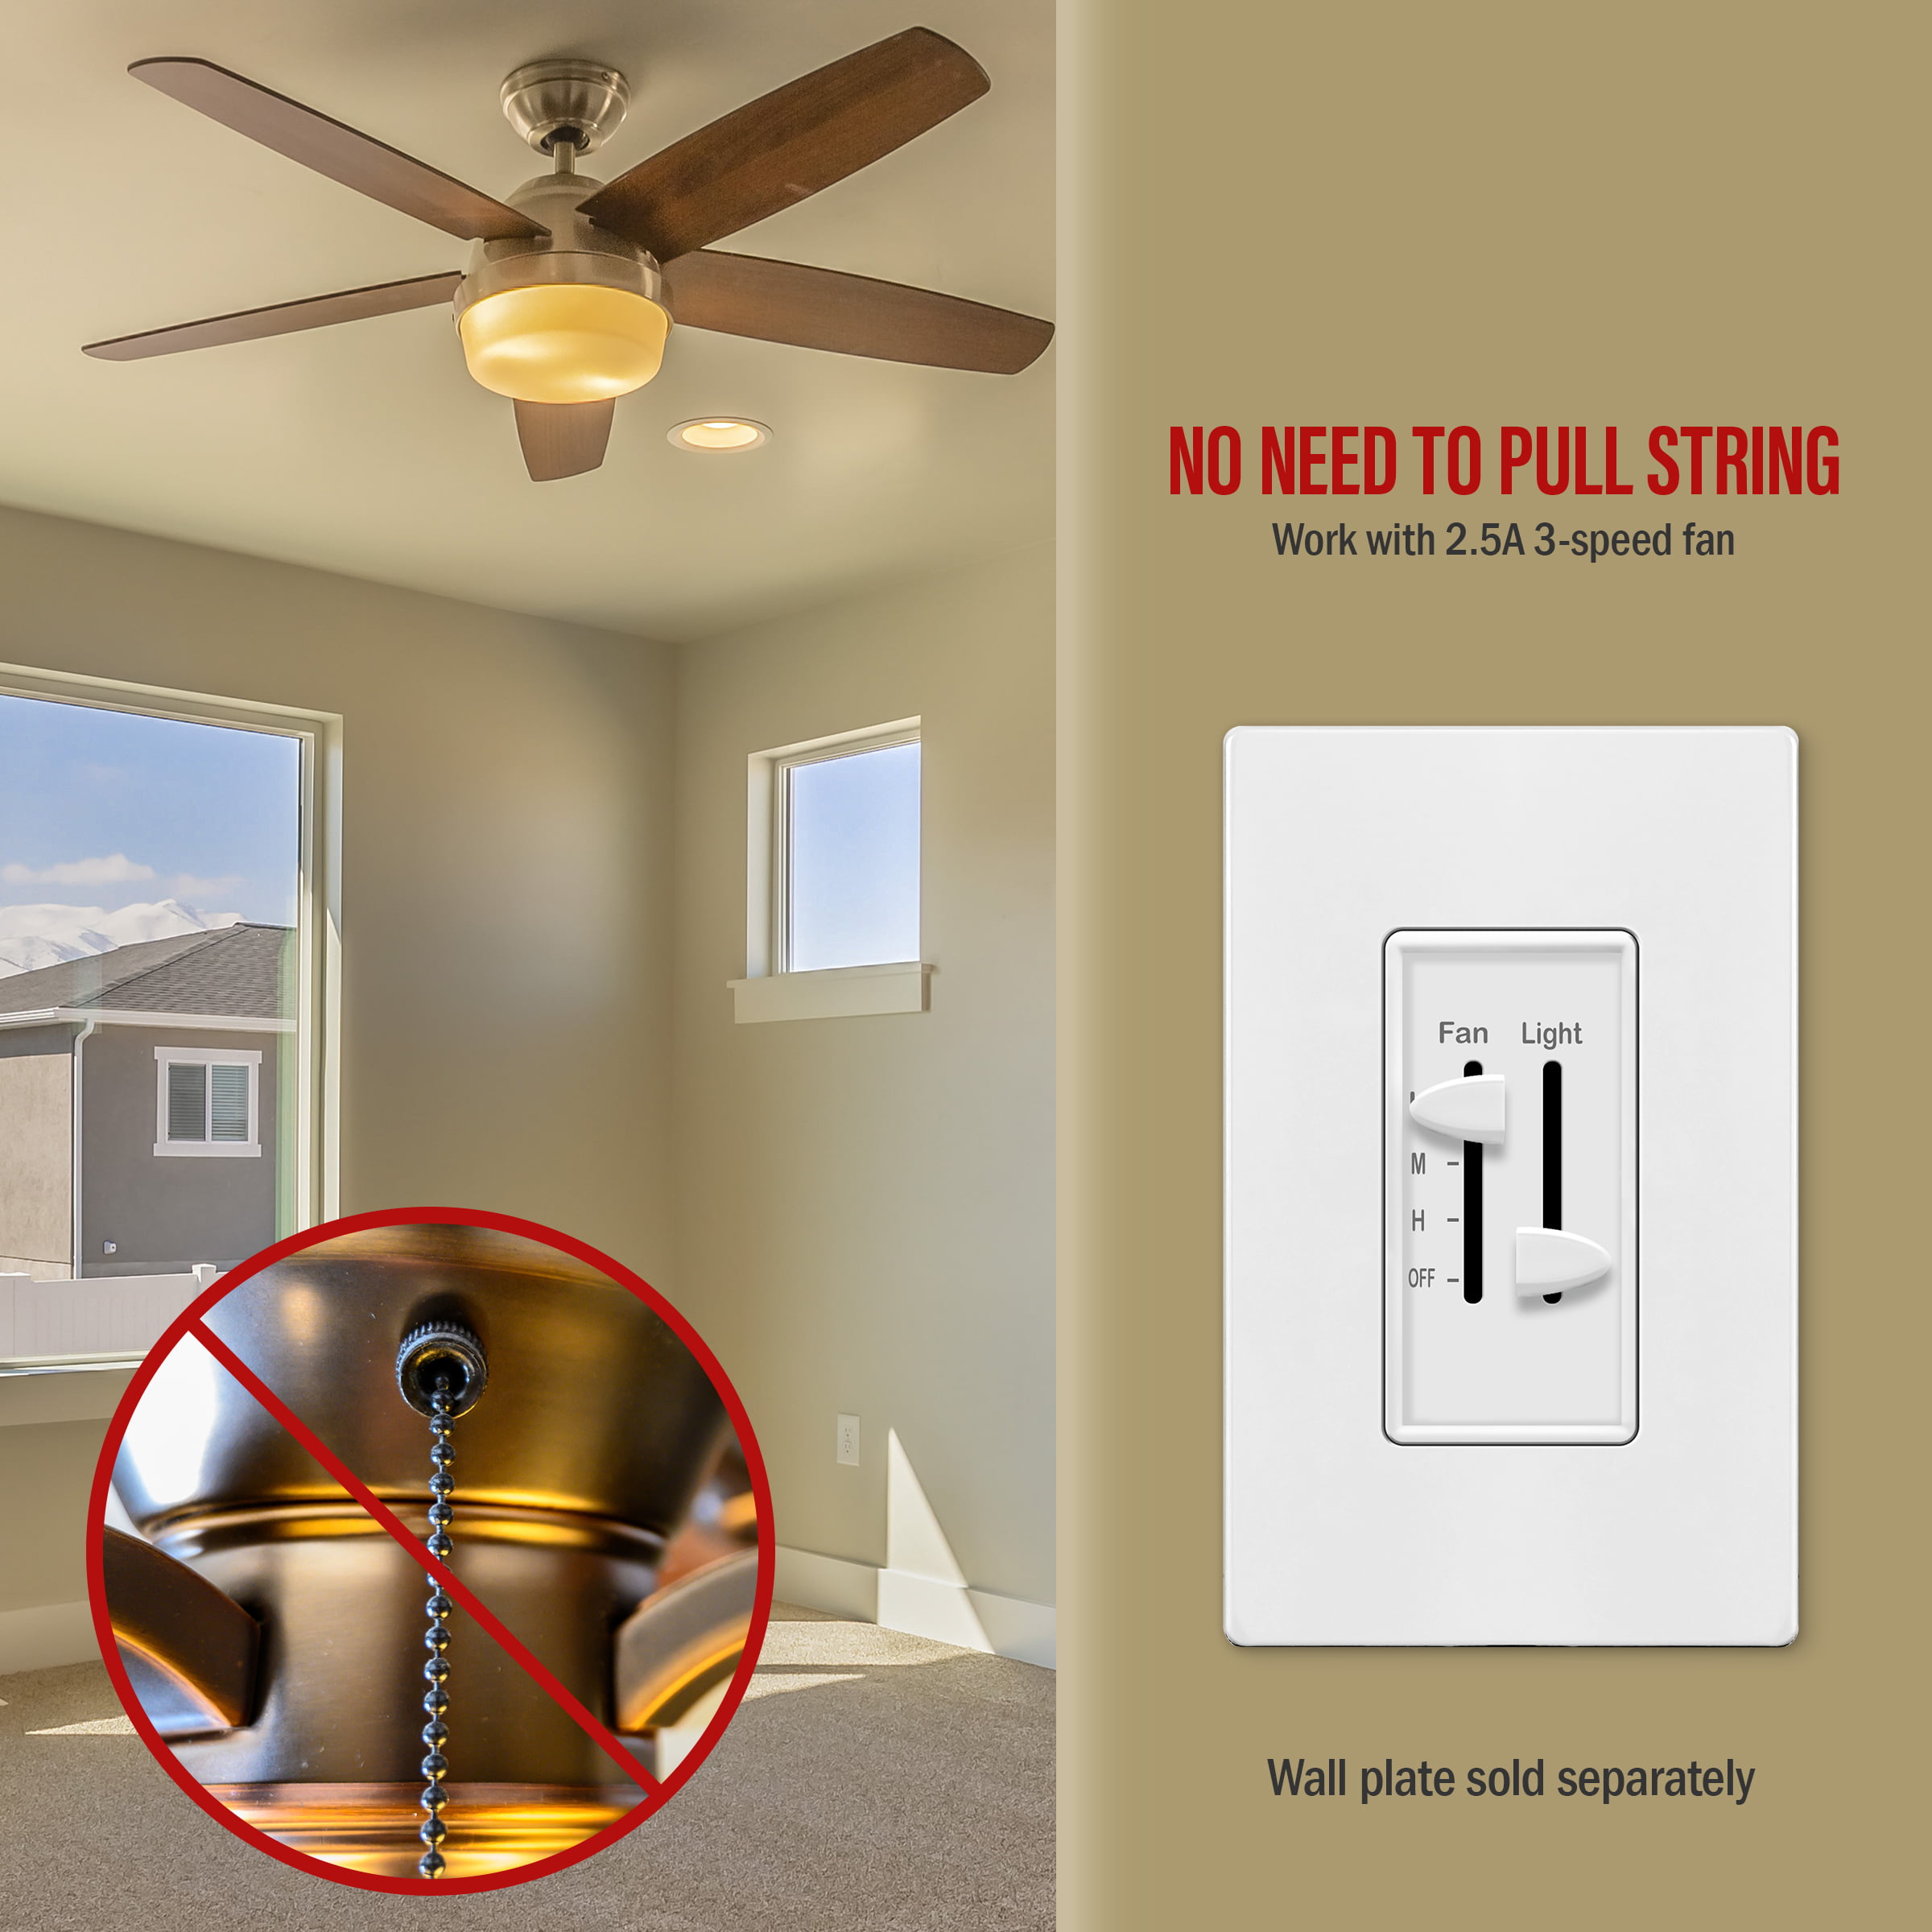 Enerlites Ceiling Fan Control And Led